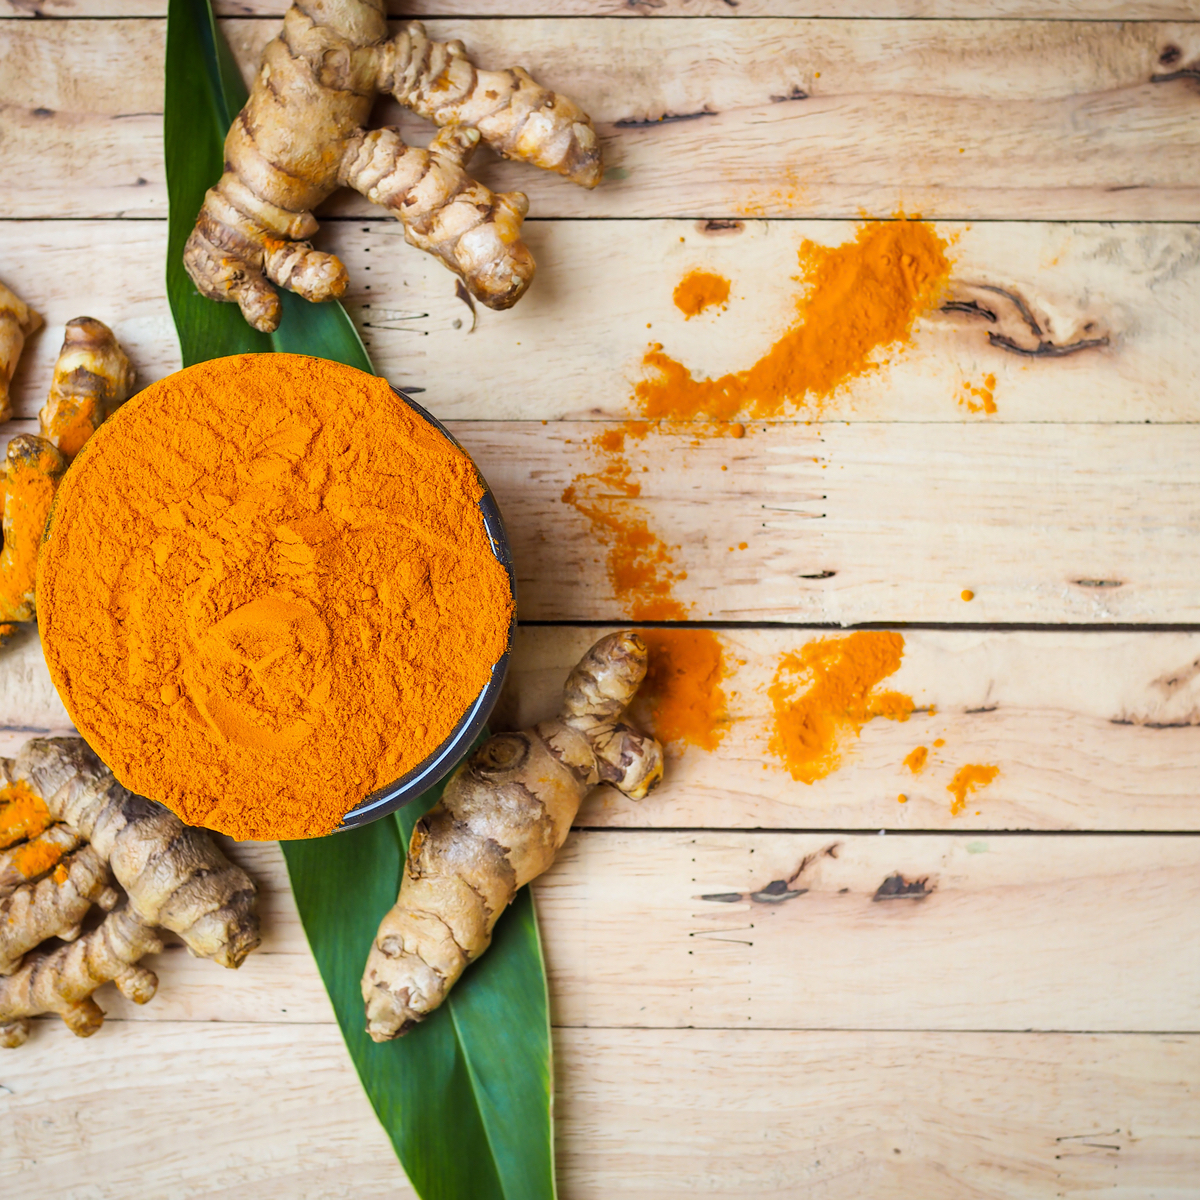 Turmeric Benefits: Can It Treat Cancer and Heart Disease?